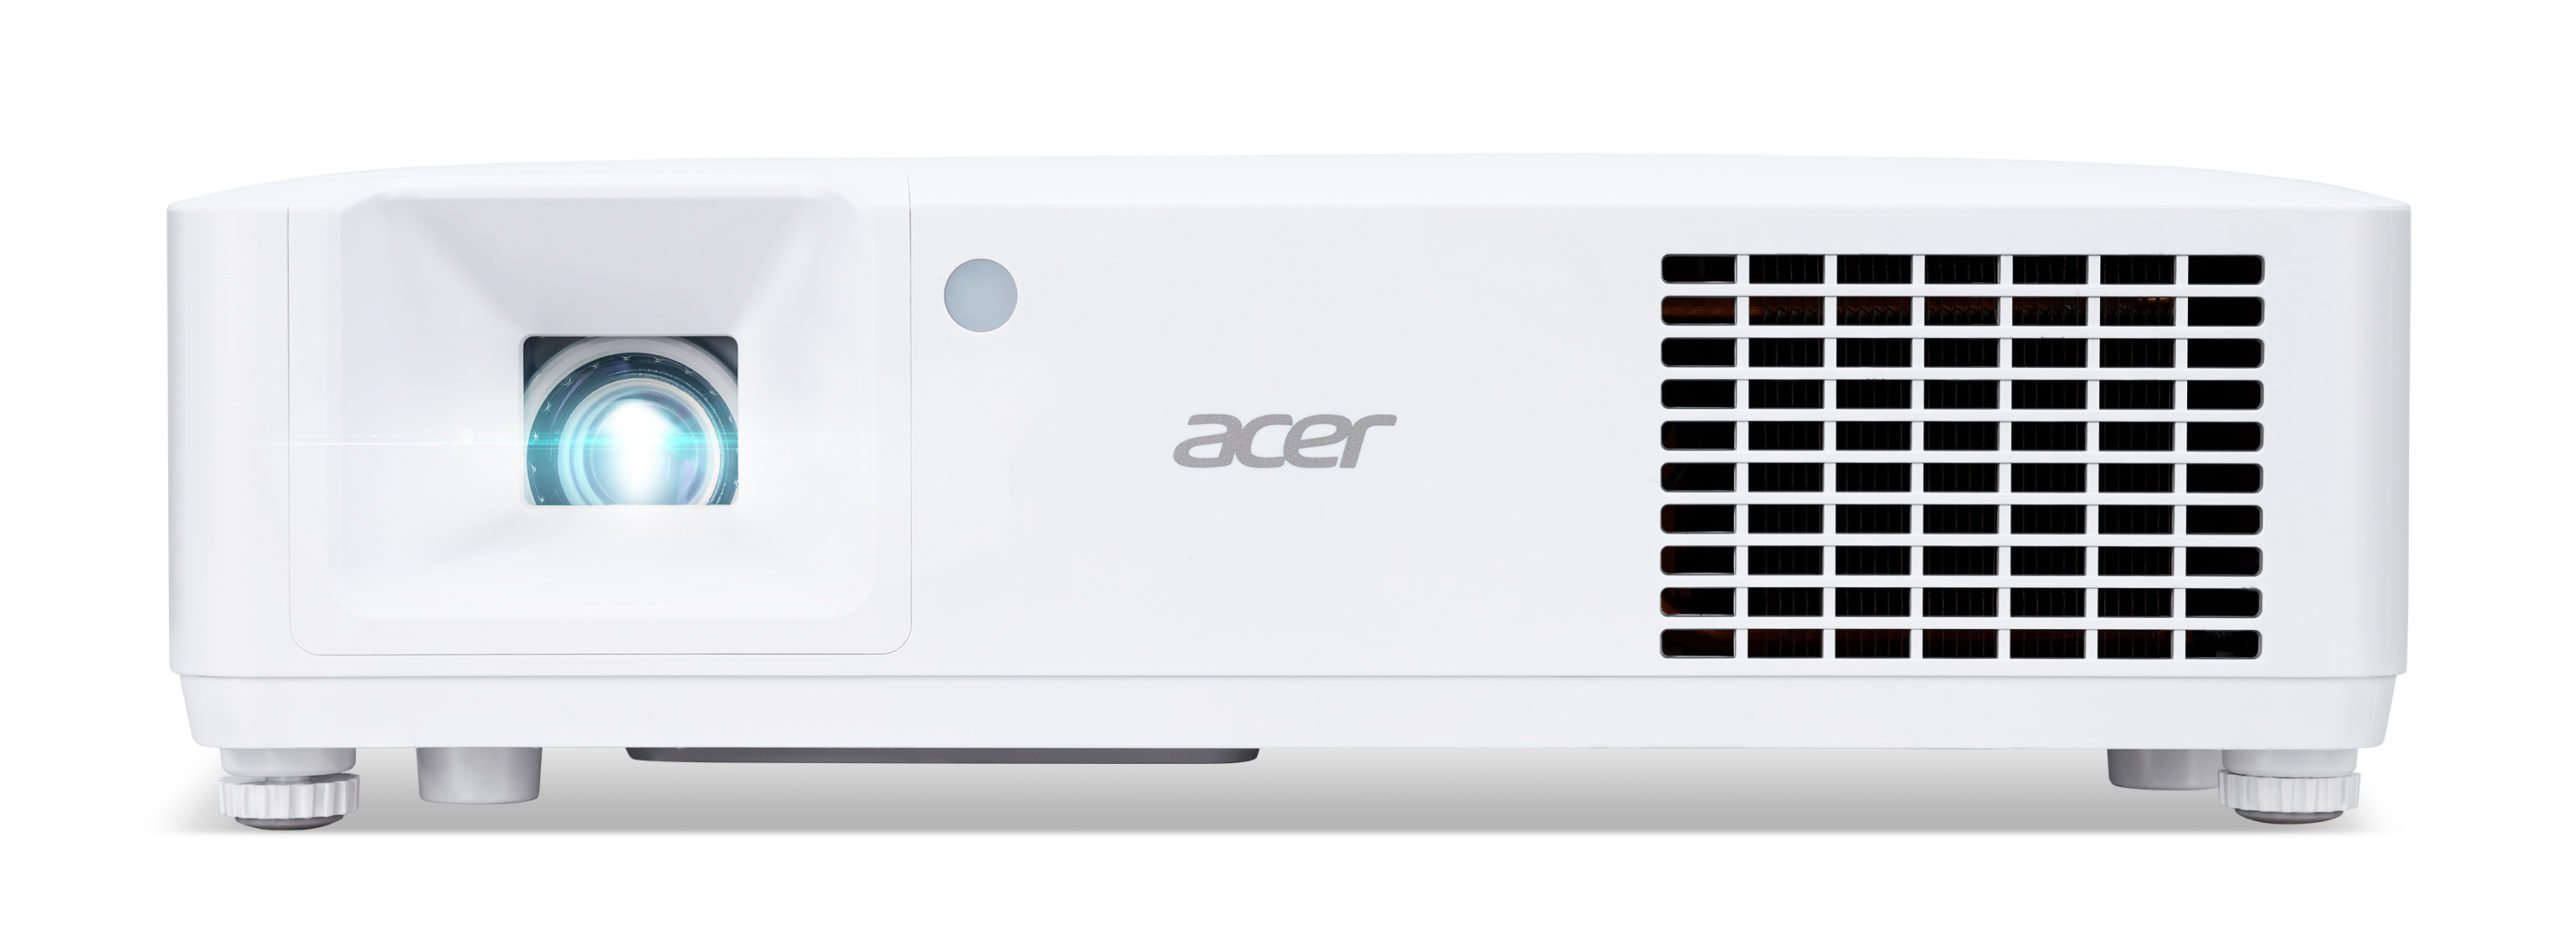 acer-vd-pd-series-pd1530i-pd1330w-vd6510i-vd5310-high_03-scaled-1